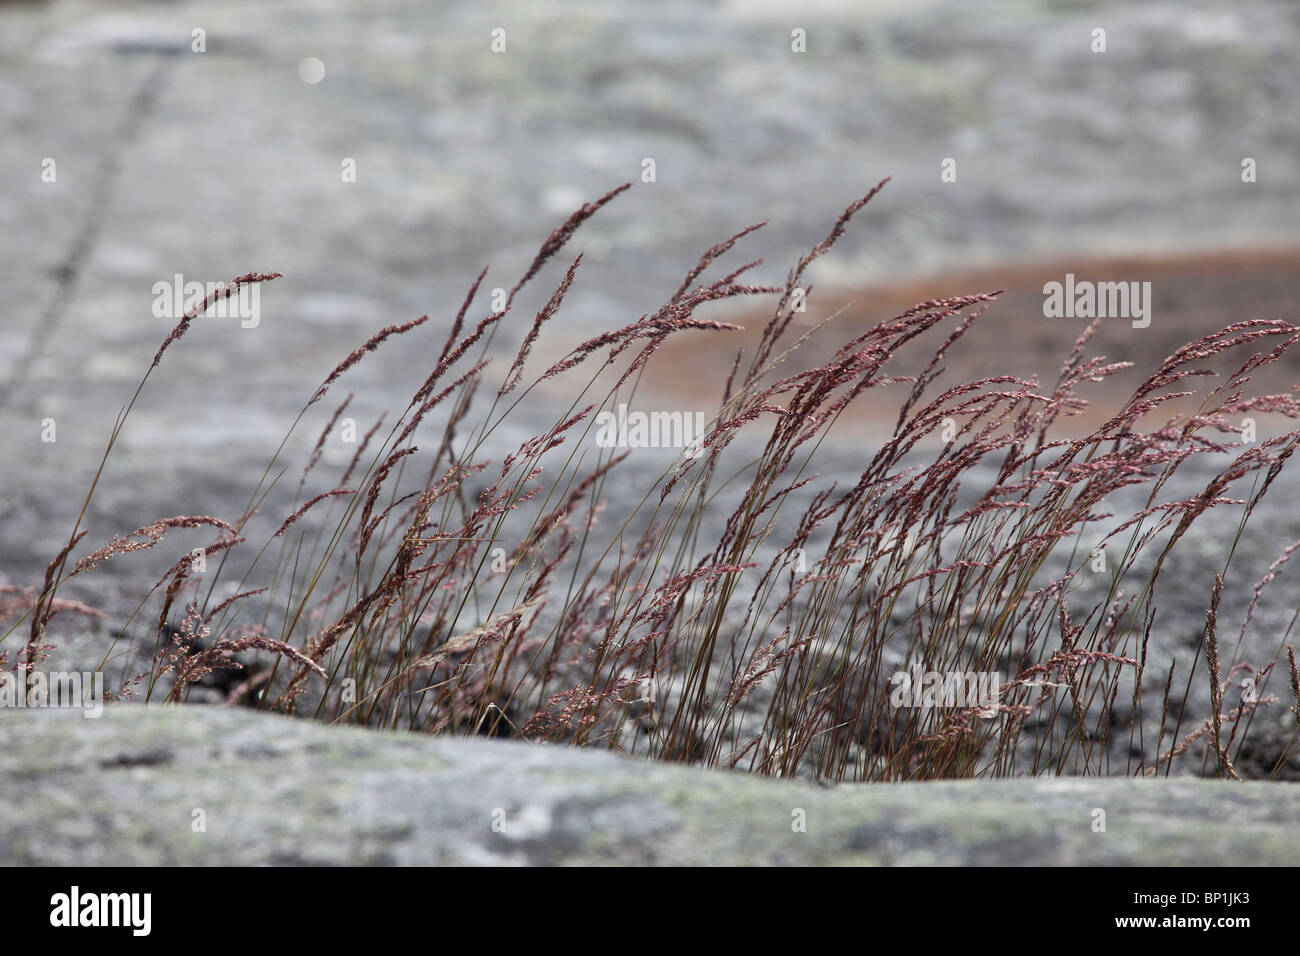 Red decorative grass by the cliffs of the sea Stock Photo